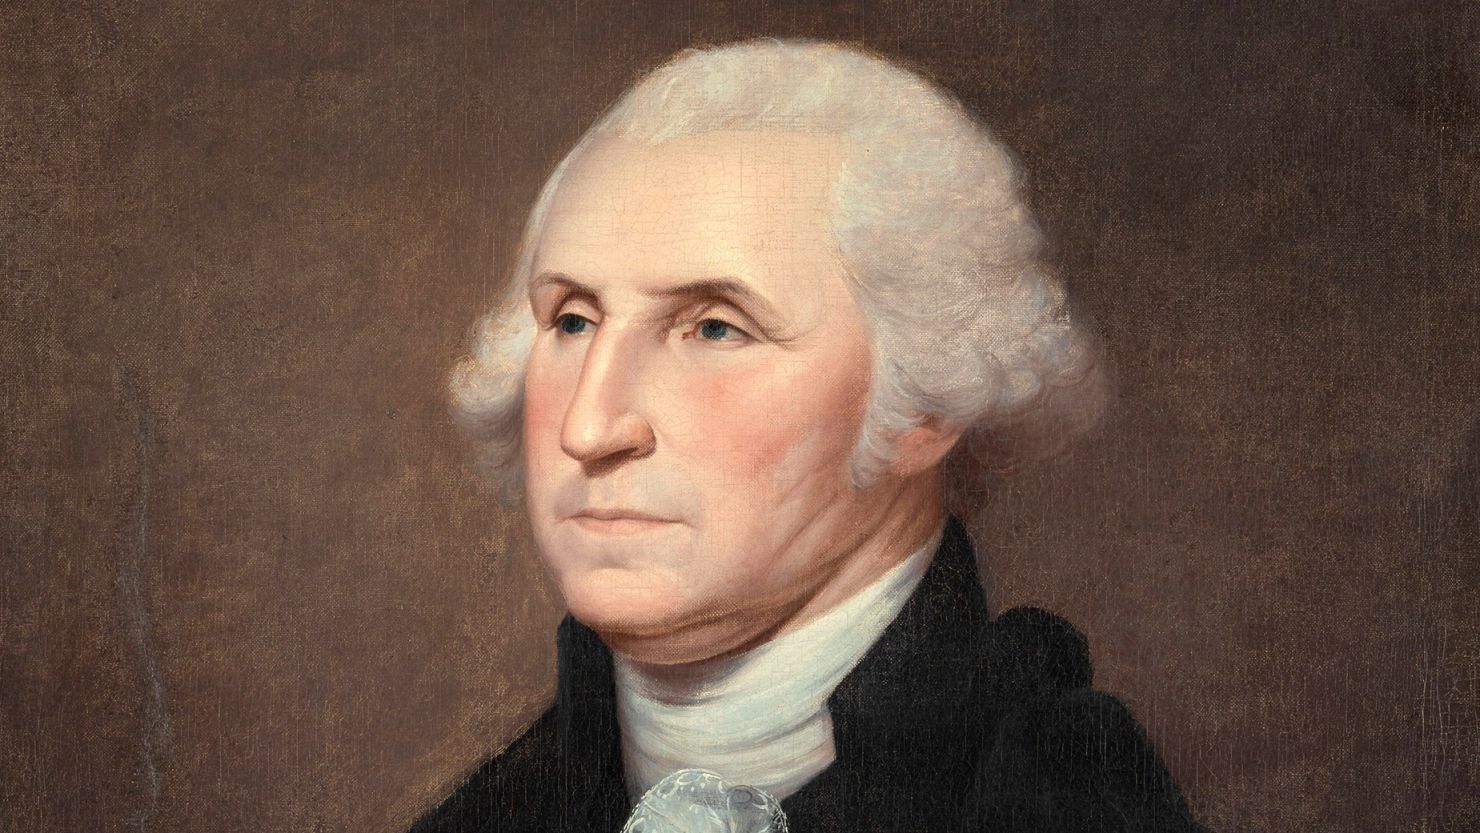 President George Washington had no children of his own, but new research has identified the remains of two of his grandnephews and their mother.